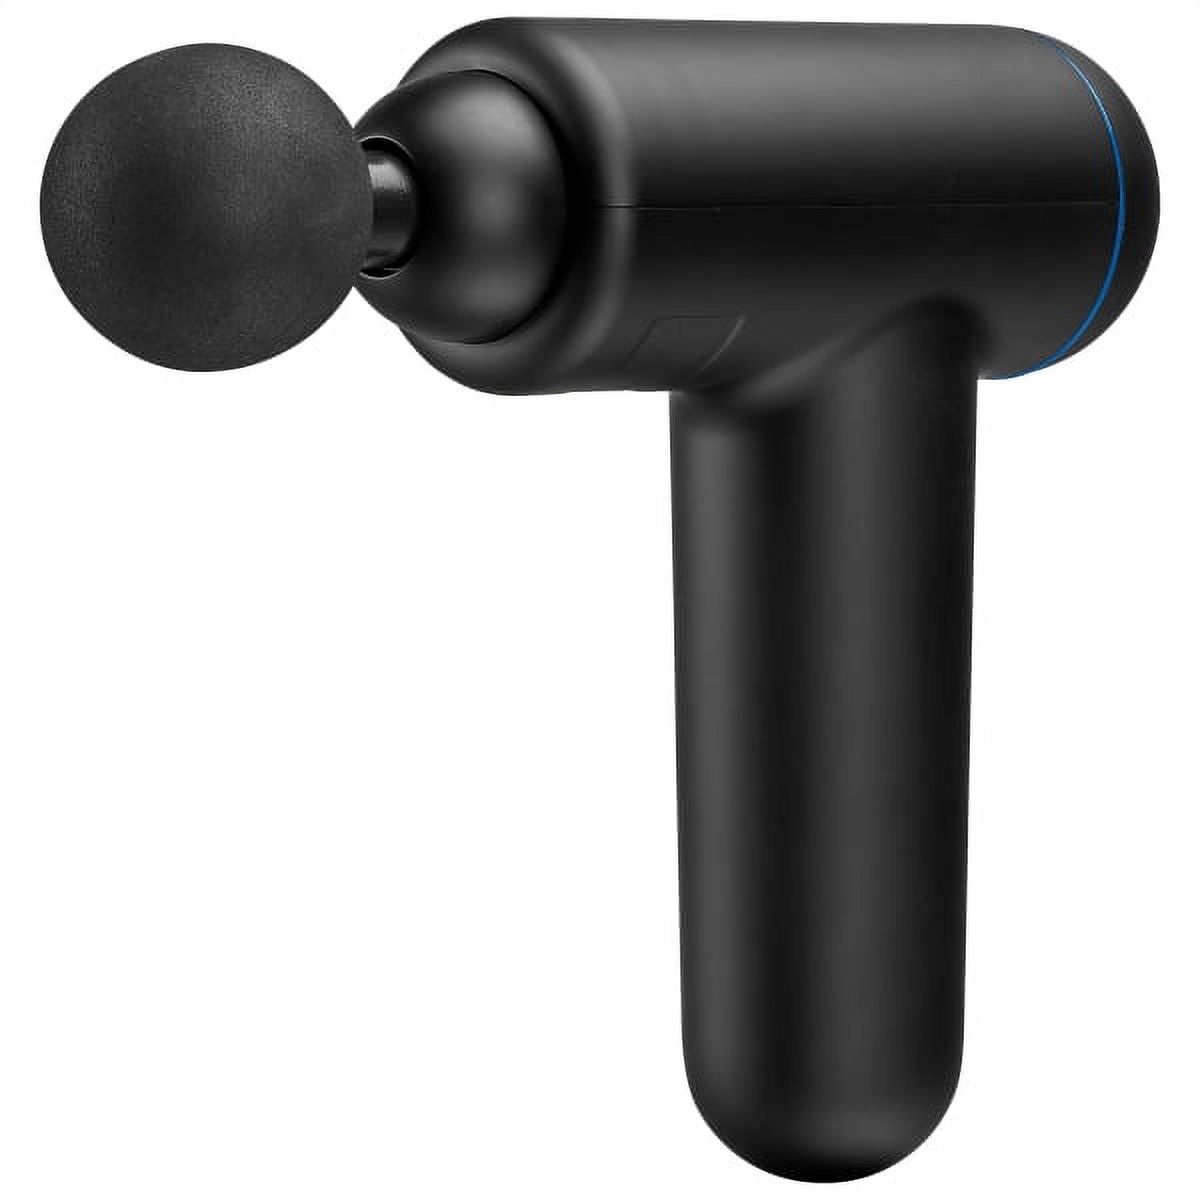 iLive Personal Handheld Massager, IMP301 - image 1 of 6